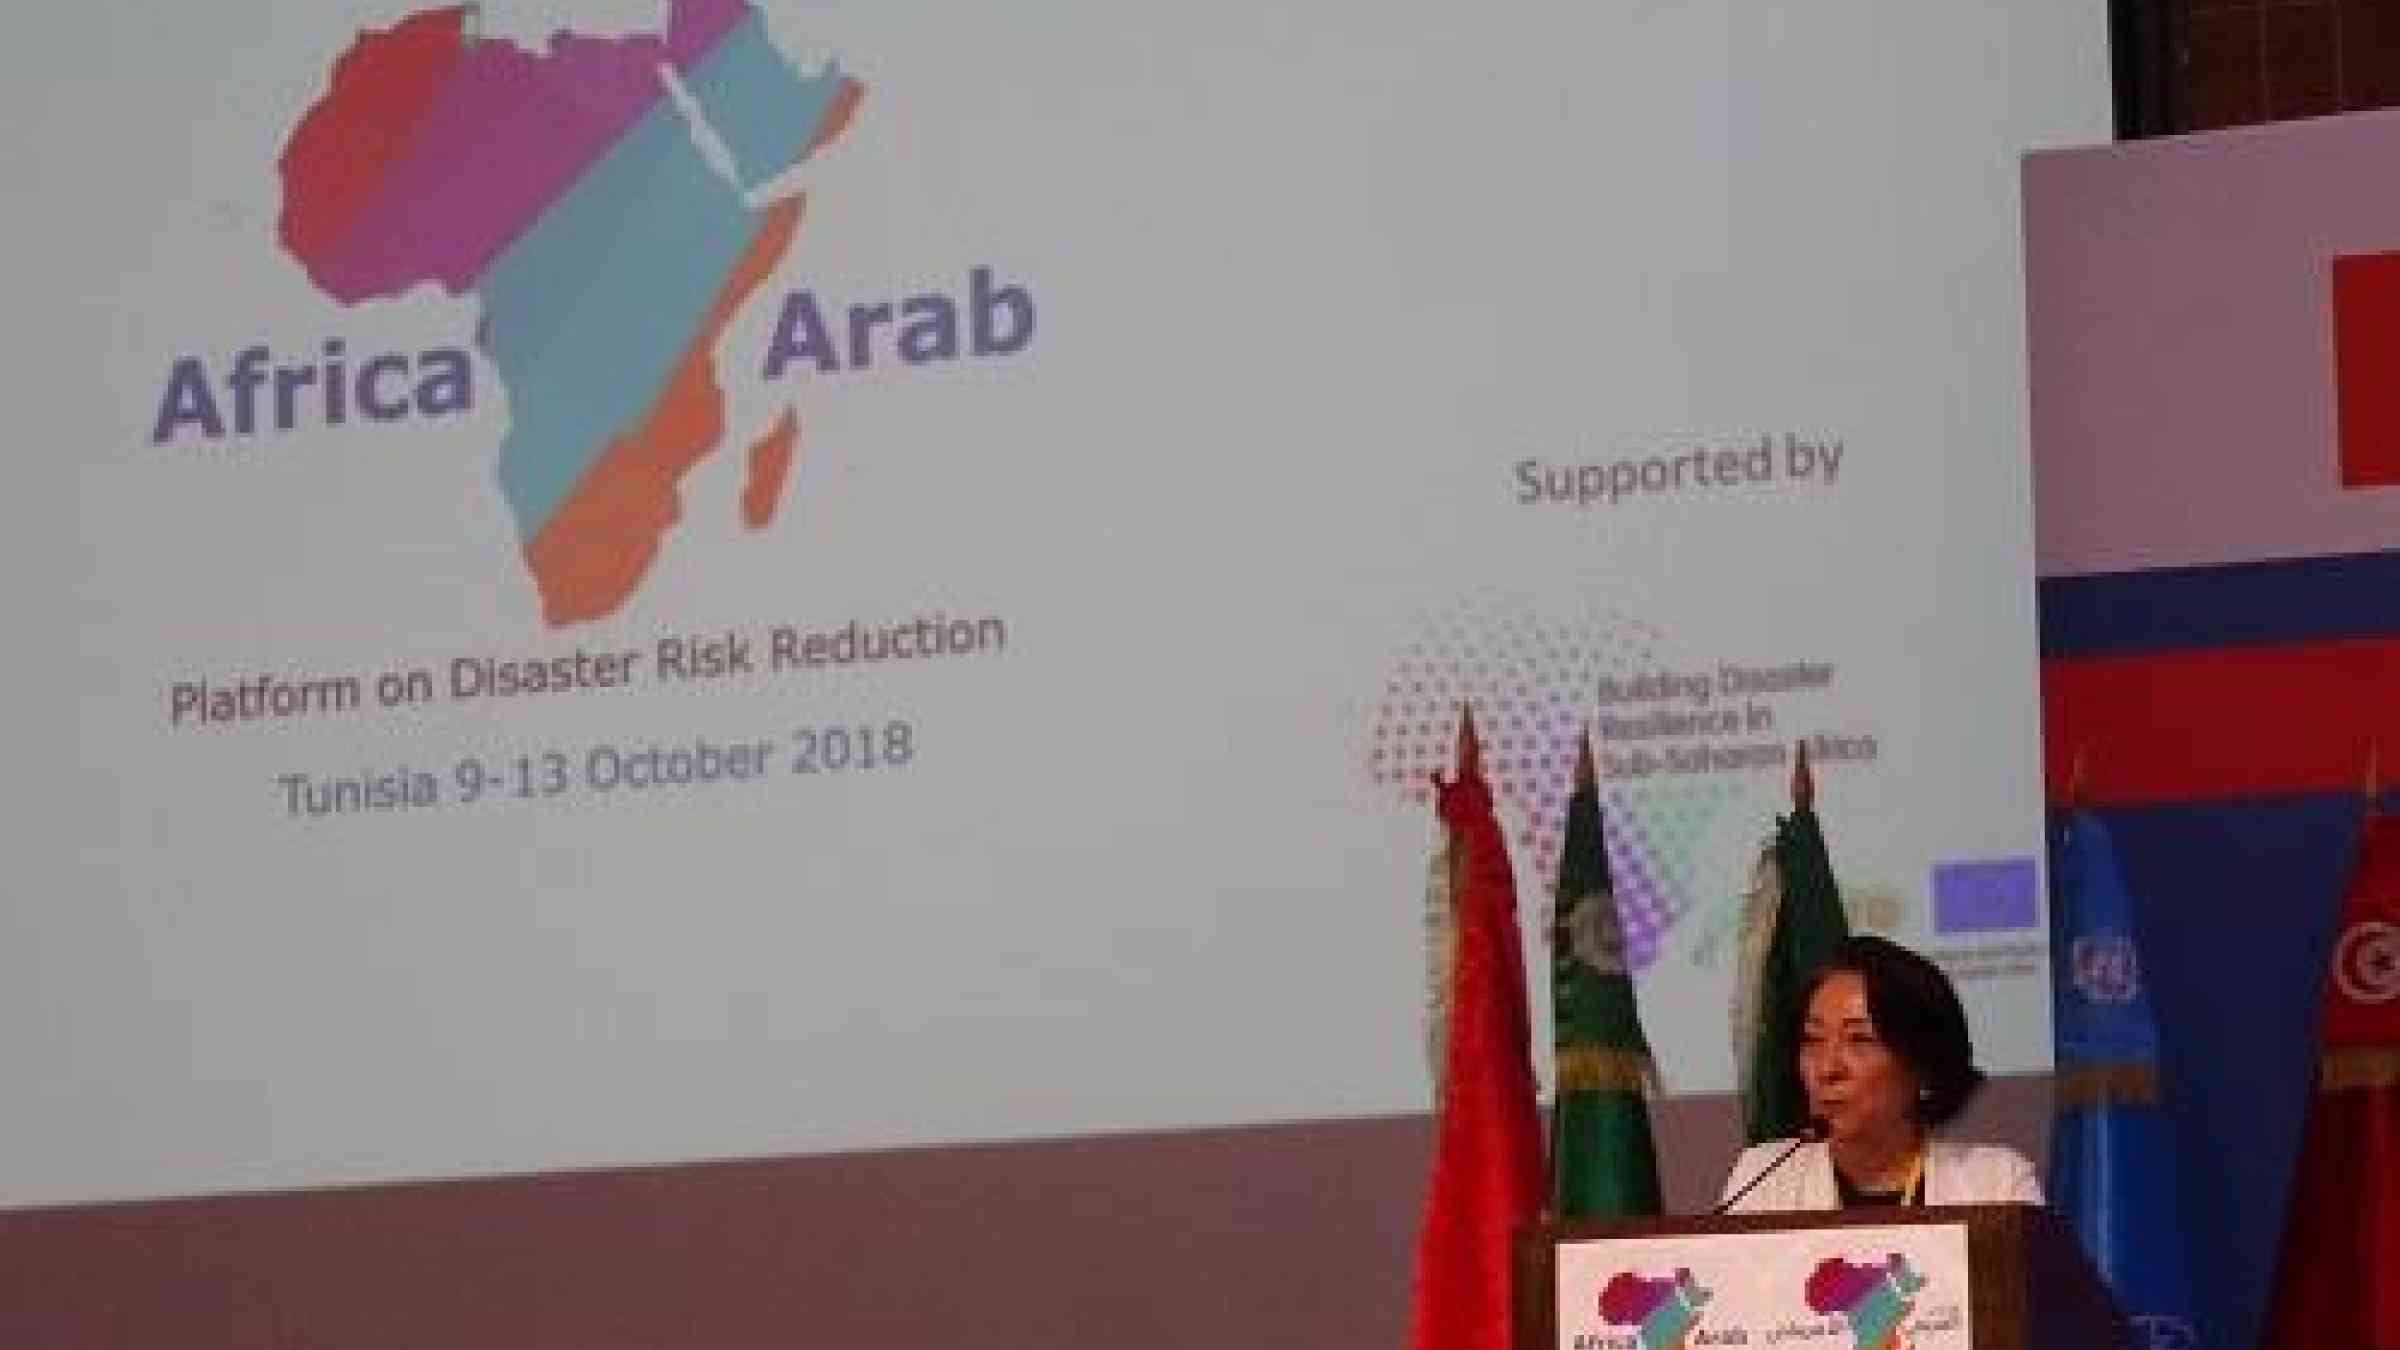 UNISDR head, Mami Mizutori, speaking at the closing ceremony of the joint Africa-Arab States Platform on Disaster Risk Reduction in Tunis